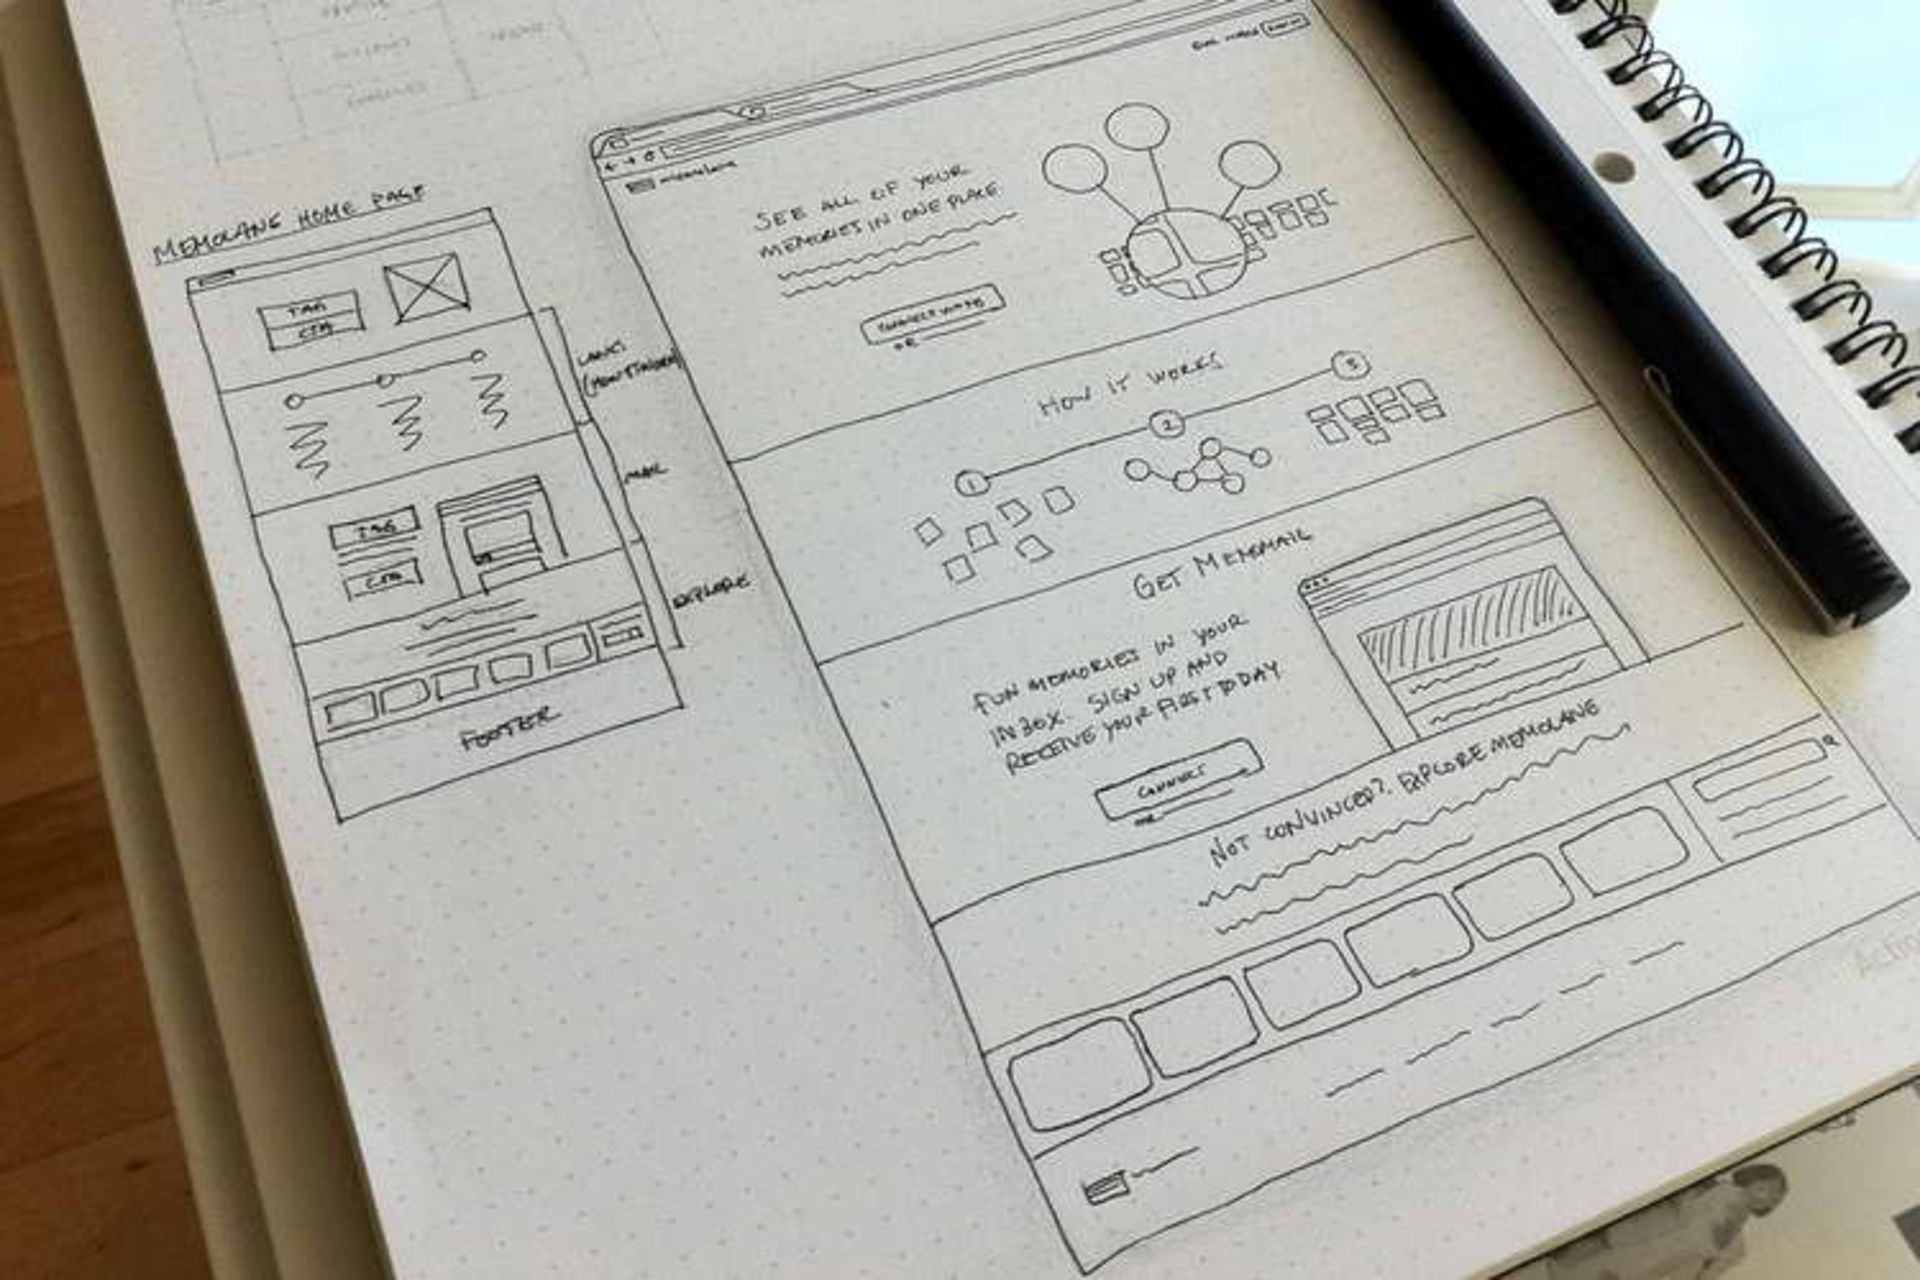 Wireframes can be presented in the form of sketches